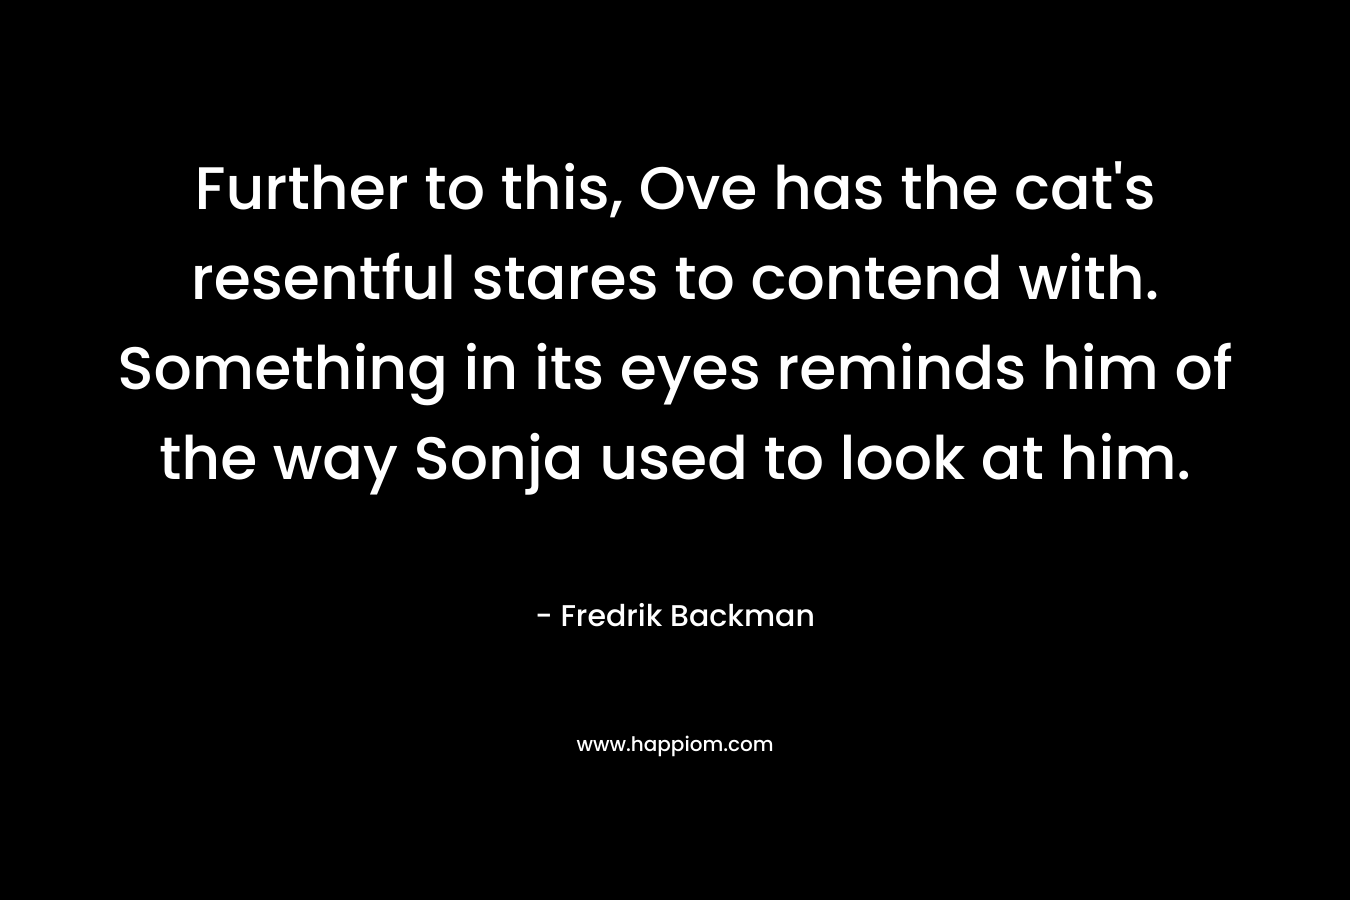 Further to this, Ove has the cat’s resentful stares to contend with. Something in its eyes reminds him of the way Sonja used to look at him. – Fredrik Backman